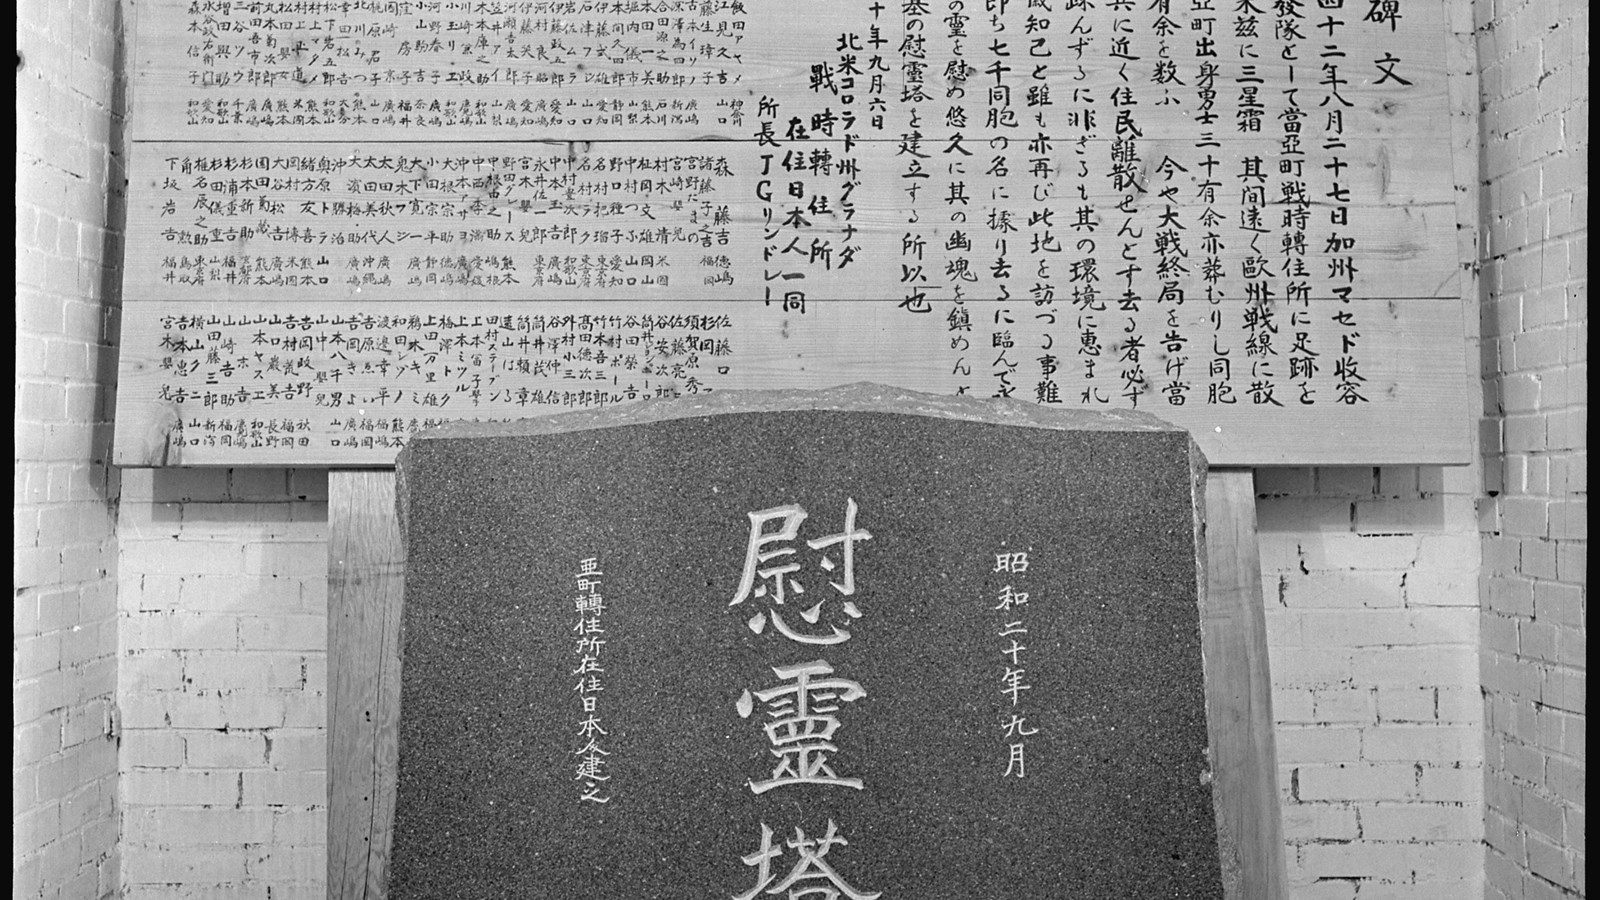 Historic image of a headstone and wooden panels with Japanese writing